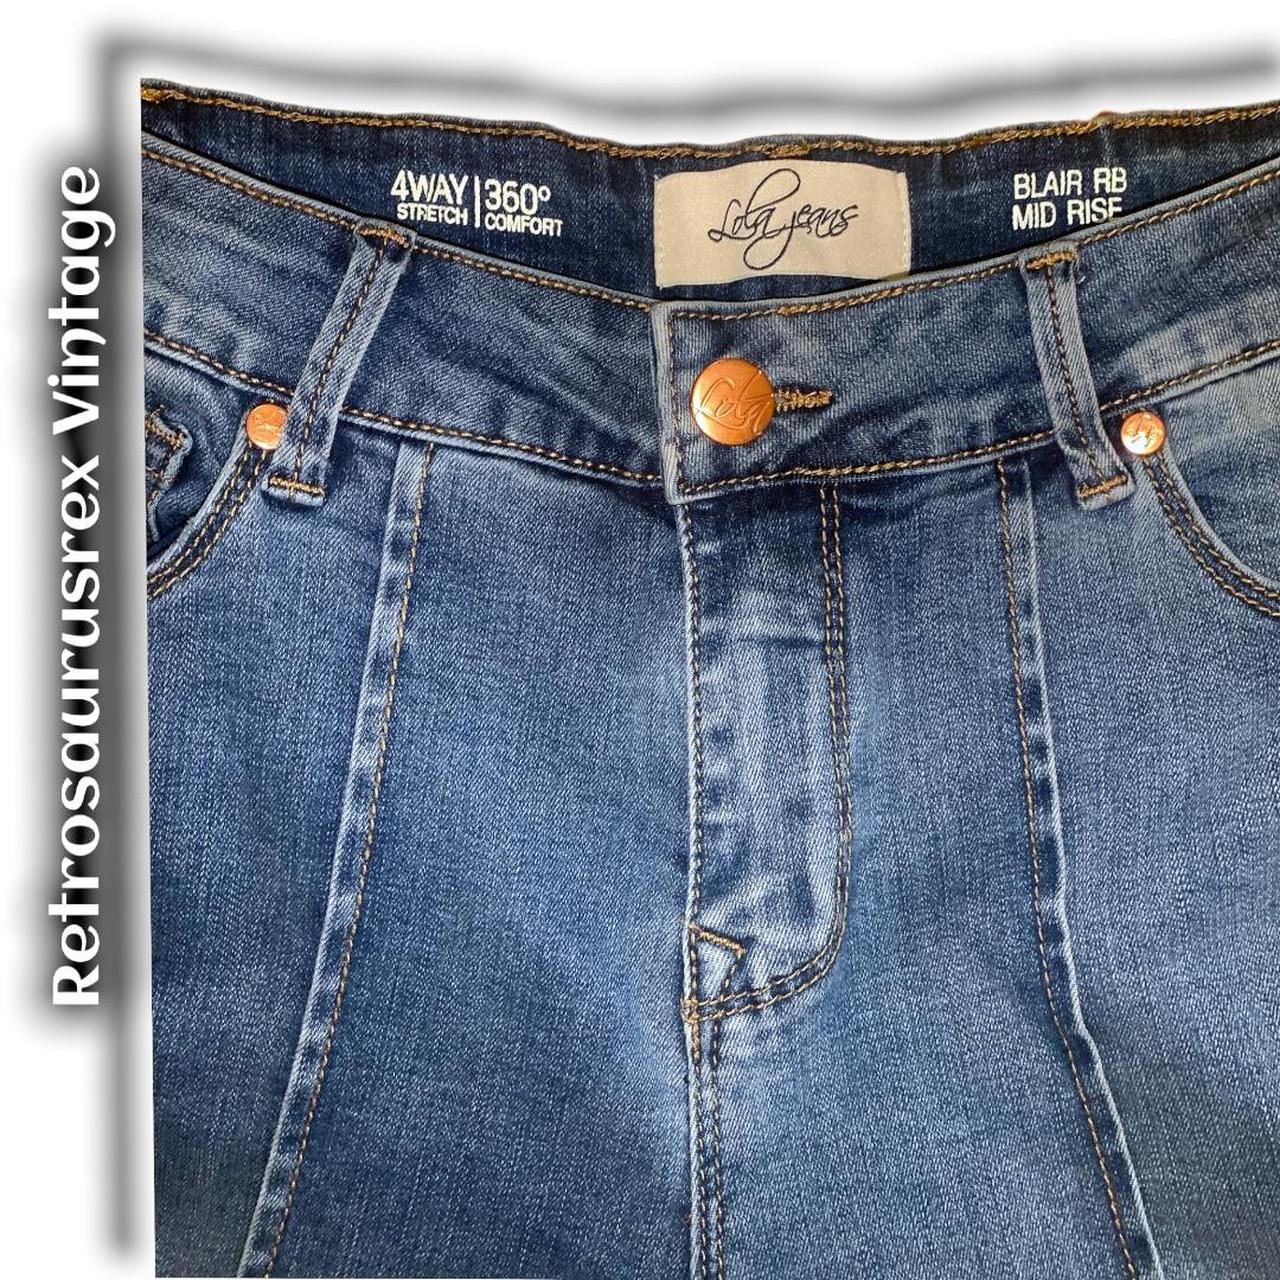 Product Image 2 - #Lola Jeans #Blair RB #MidRise